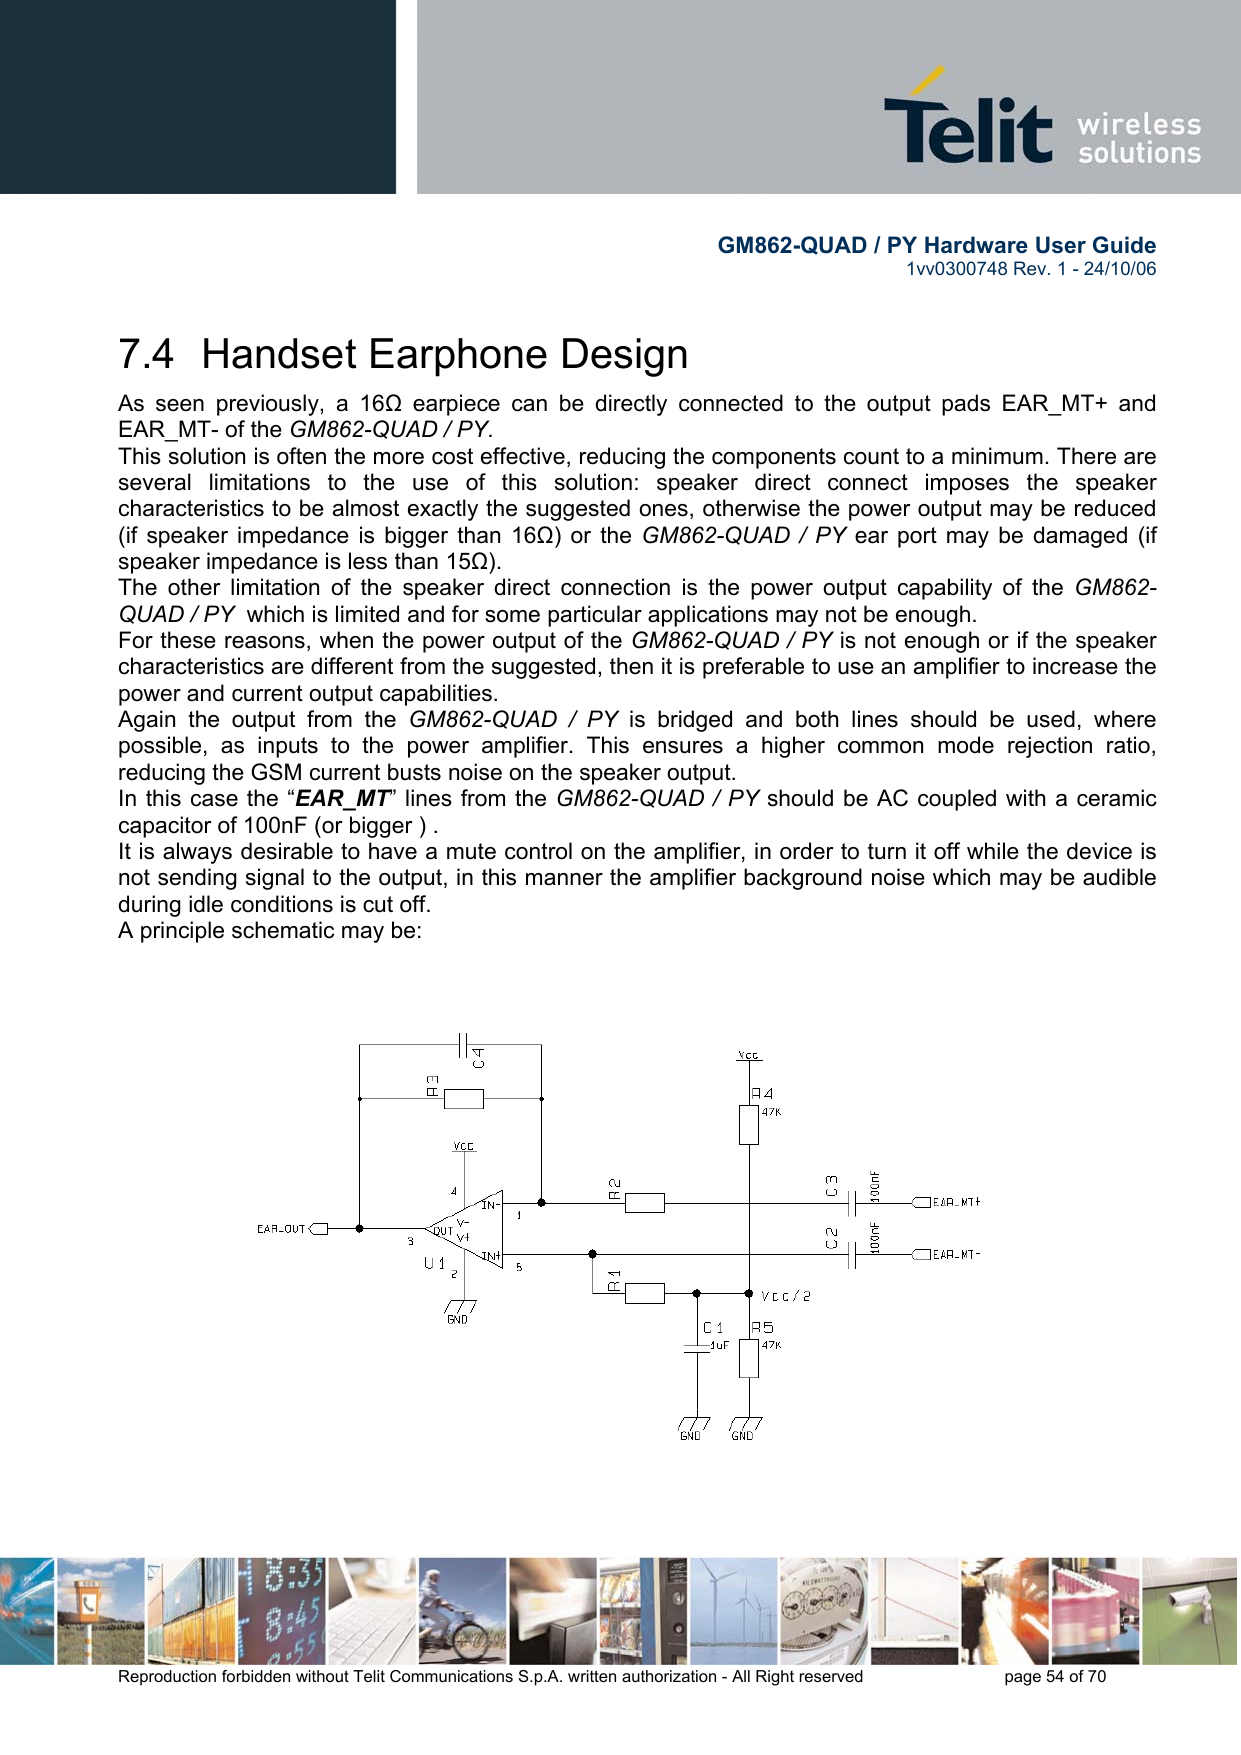        GM862-QUAD / PY Hardware User Guide   1vv0300748 Rev. 1 - 24/10/06    Reproduction forbidden without Telit Communications S.p.A. written authorization - All Right reserved    page 54 of 70  7.4  Handset Earphone Design As seen previously, a 16Ω earpiece can be directly connected to the output pads EAR_MT+ and EAR_MT- of the GM862-QUAD / PY. This solution is often the more cost effective, reducing the components count to a minimum. There are several limitations to the use of this solution: speaker direct connect imposes the speaker characteristics to be almost exactly the suggested ones, otherwise the power output may be reduced (if speaker impedance is bigger than 16Ω) or the GM862-QUAD / PY ear port may be damaged (if speaker impedance is less than 15Ω). The other limitation of the speaker direct connection is the power output capability of the GM862-QUAD / PY  which is limited and for some particular applications may not be enough. For these reasons, when the power output of the GM862-QUAD / PY is not enough or if the speaker characteristics are different from the suggested, then it is preferable to use an amplifier to increase the power and current output capabilities.  Again the output from the GM862-QUAD / PY is bridged and both lines should be used, where possible, as inputs to the power amplifier. This ensures a higher common mode rejection ratio, reducing the GSM current busts noise on the speaker output. In this case the “EAR_MT” lines from the GM862-QUAD / PY should be AC coupled with a ceramic capacitor of 100nF (or bigger ) . It is always desirable to have a mute control on the amplifier, in order to turn it off while the device is not sending signal to the output, in this manner the amplifier background noise which may be audible during idle conditions is cut off. A principle schematic may be:  